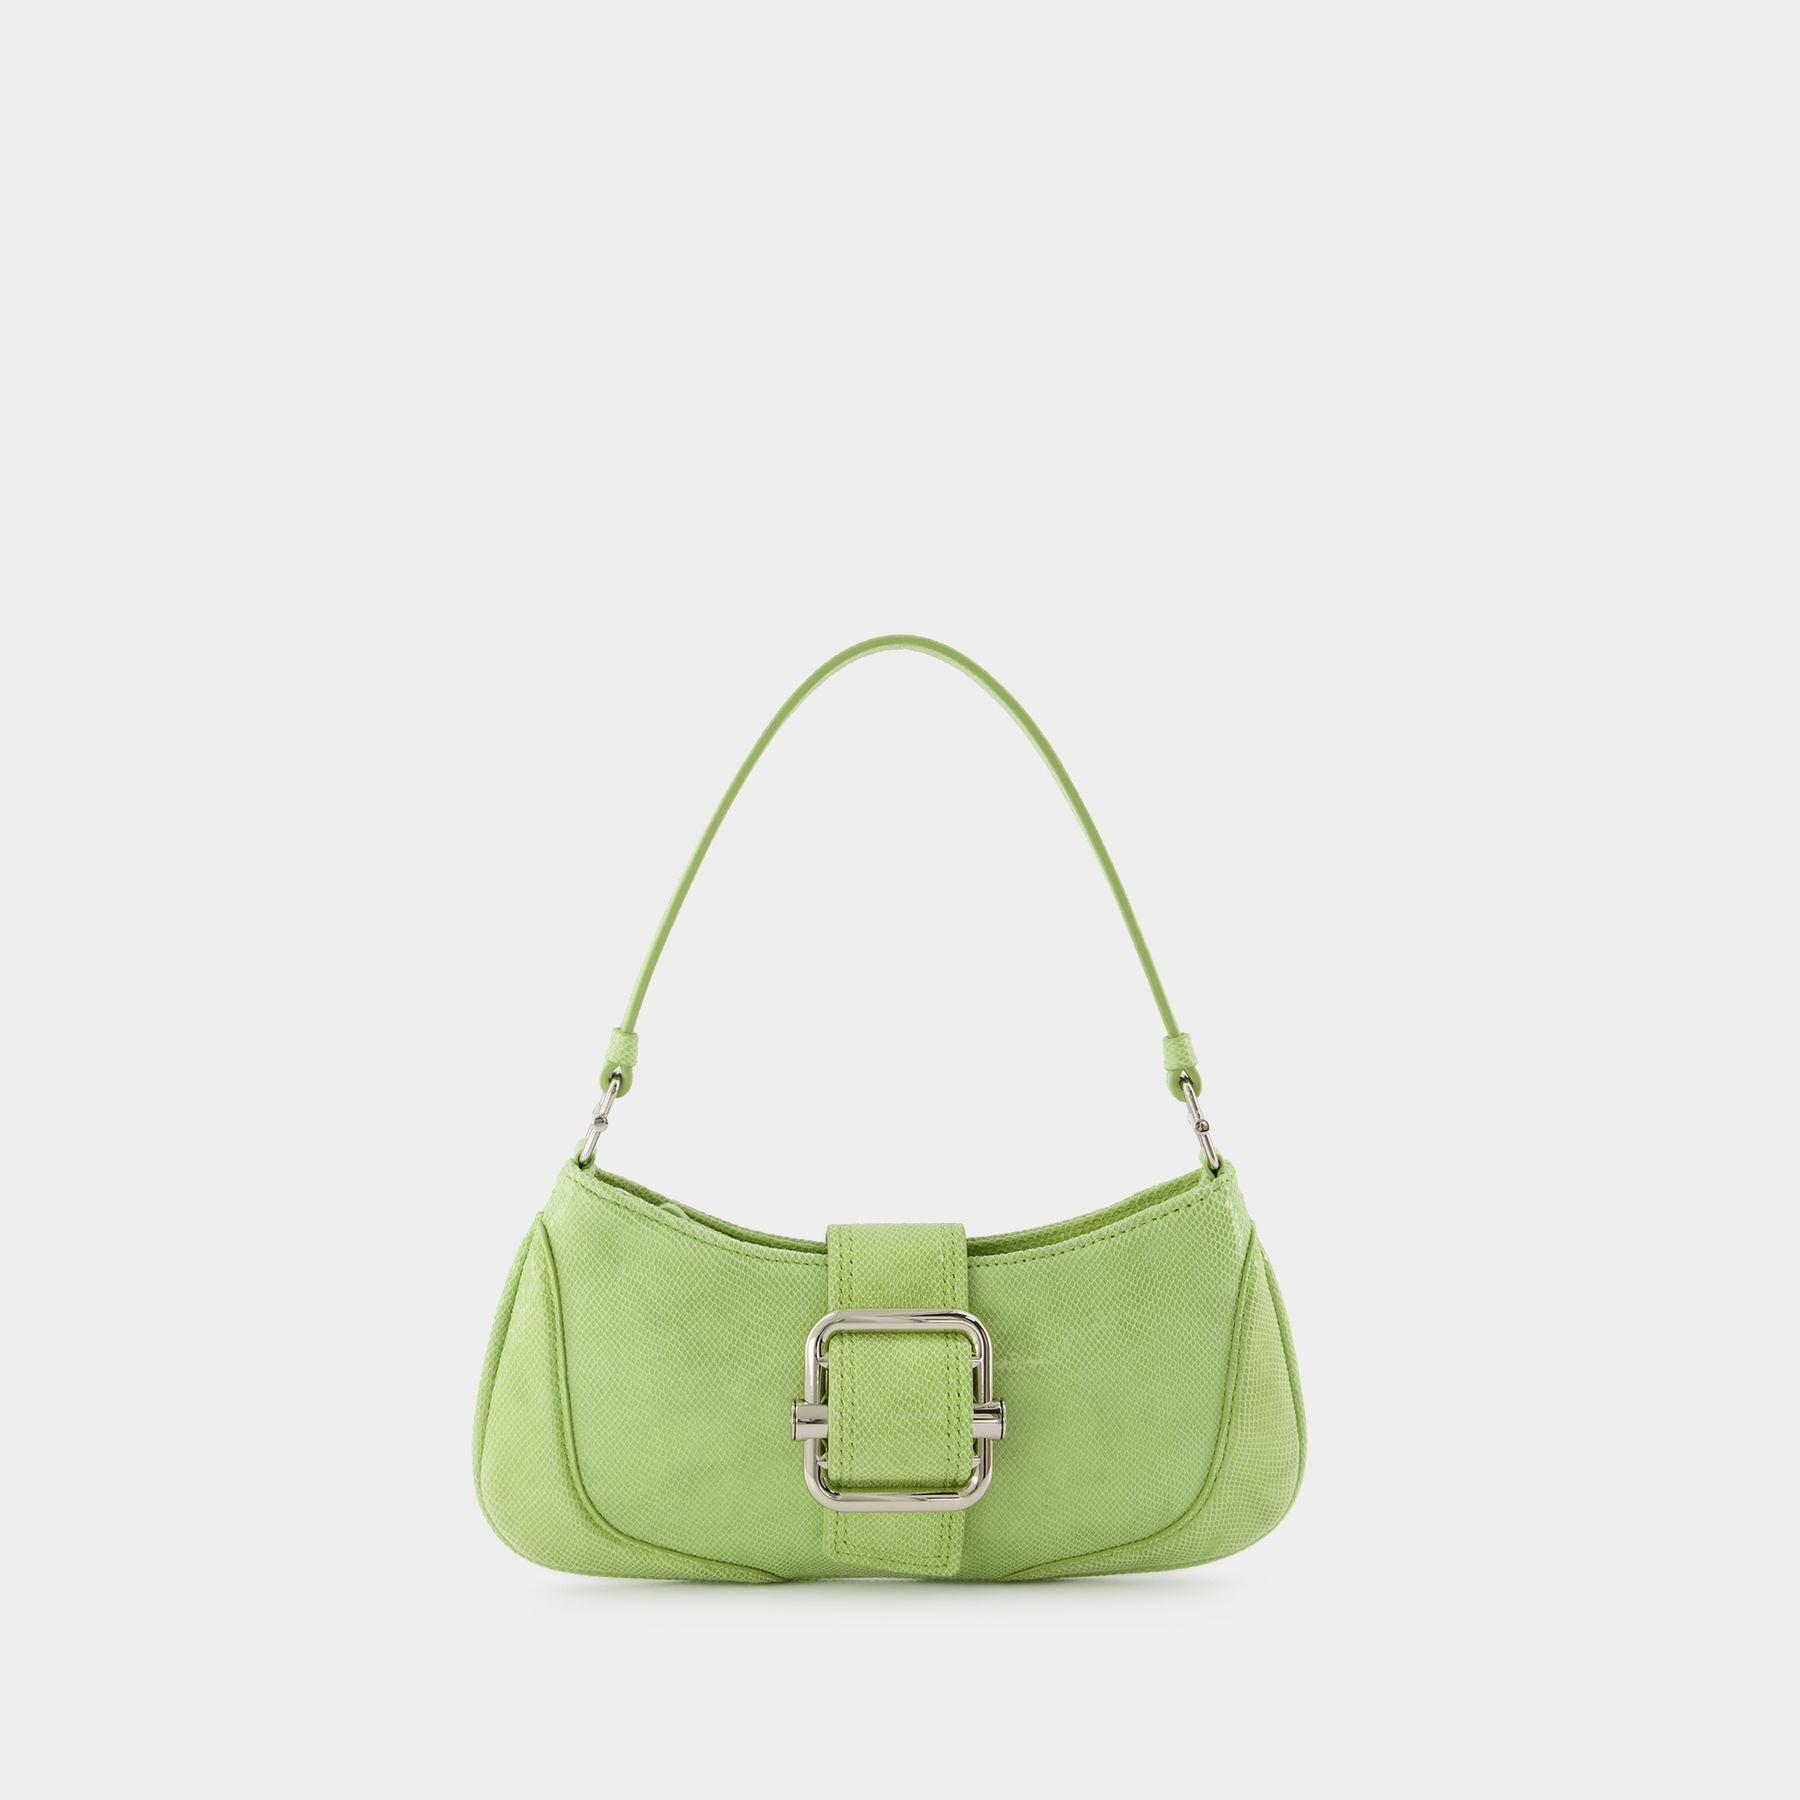 OSOI Brocle Small Hobo Bag - - Cloud Lime Green - Leather | Lyst